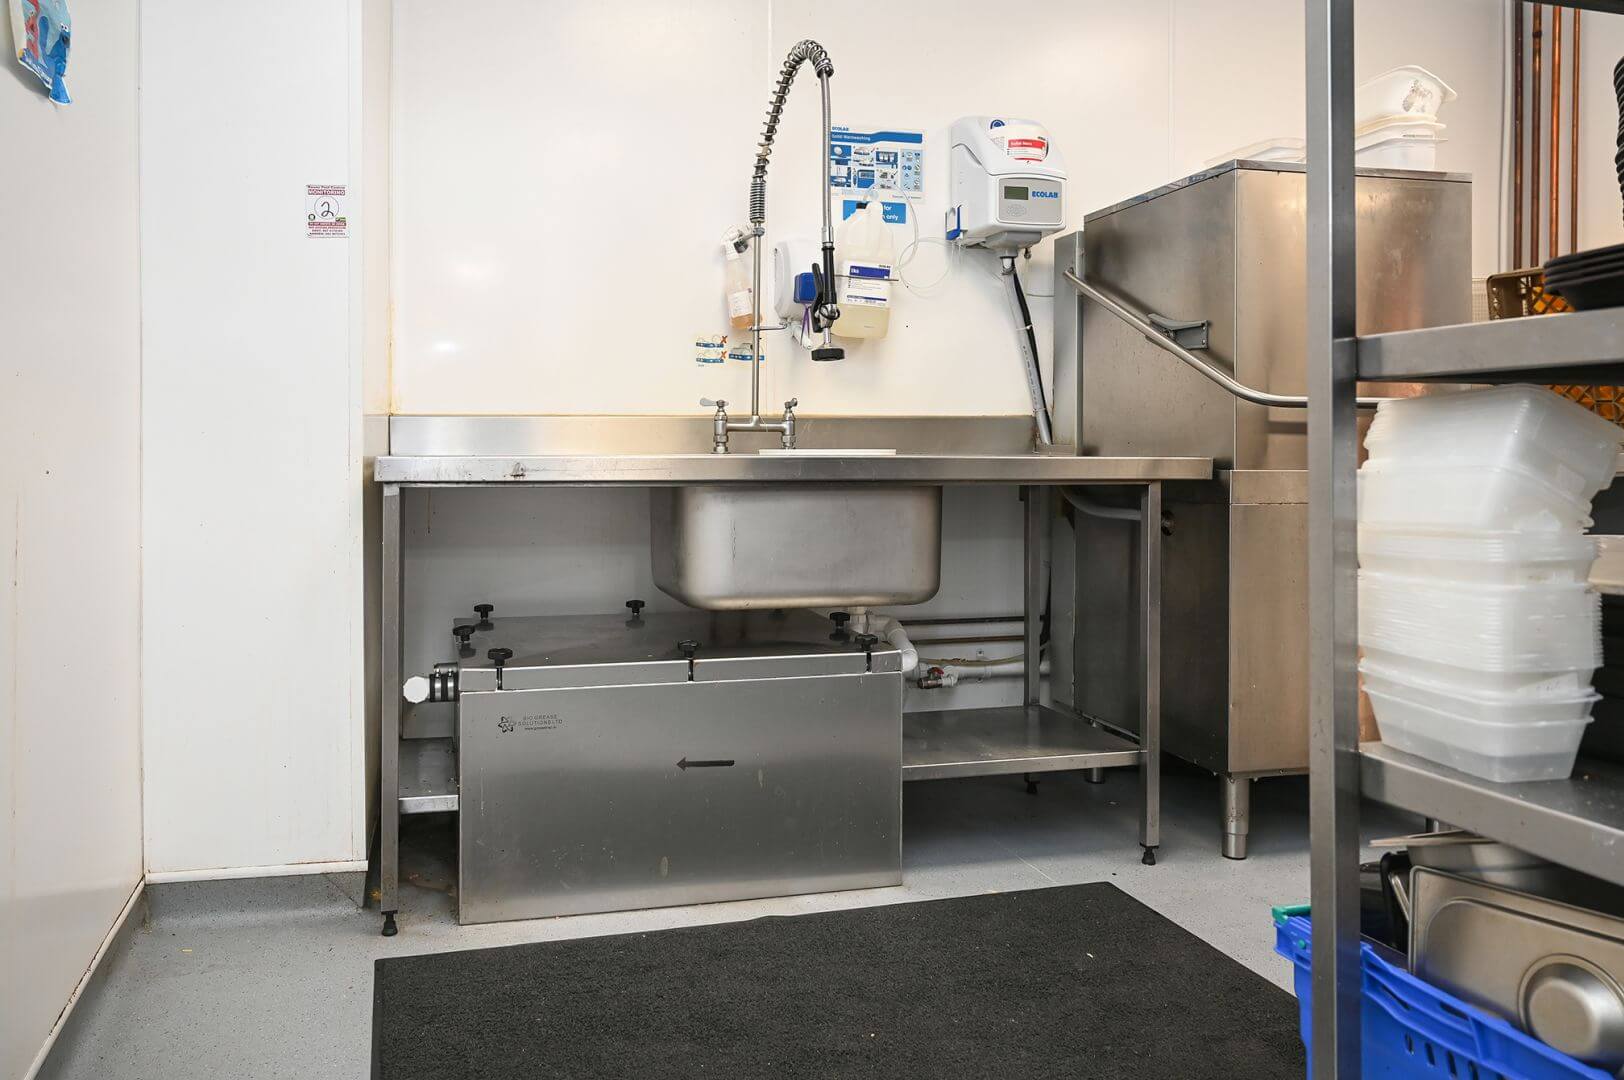 Commercial kitchen grease traps